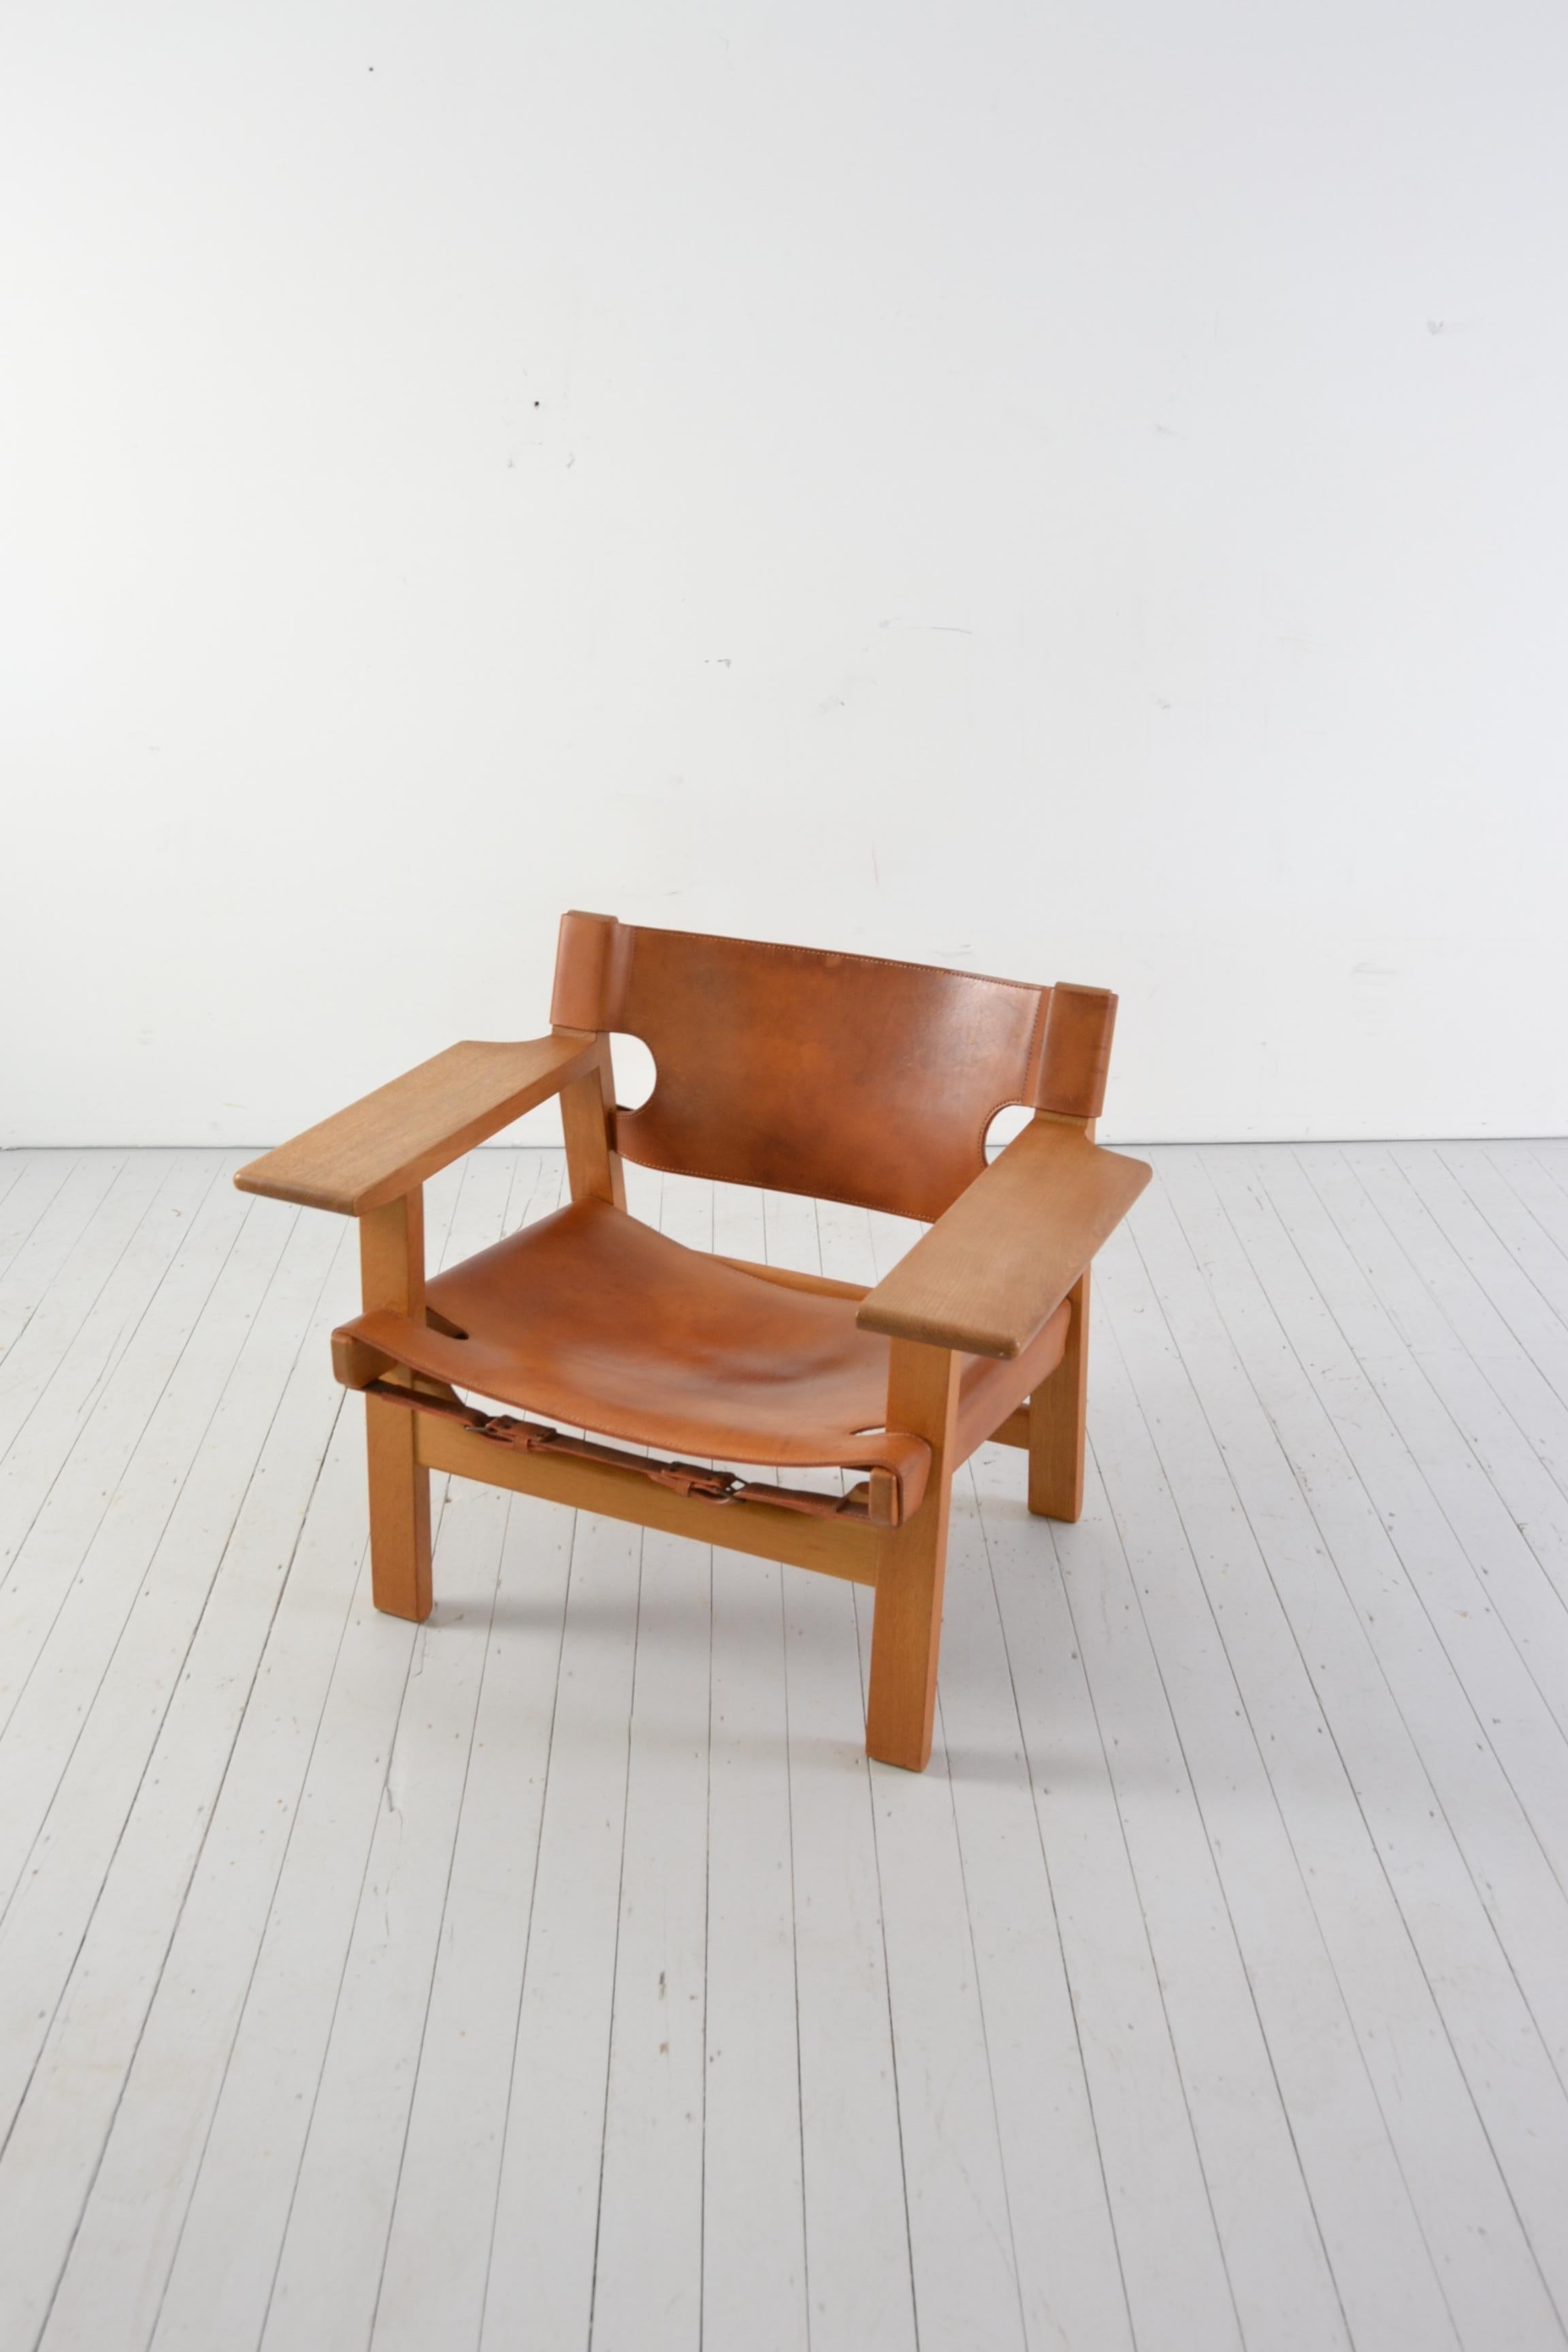 Iconic Borge Mogensen Spanish chair with nice patina. 

Thick cognac leather is exquisite with age; beautiful oak frame.